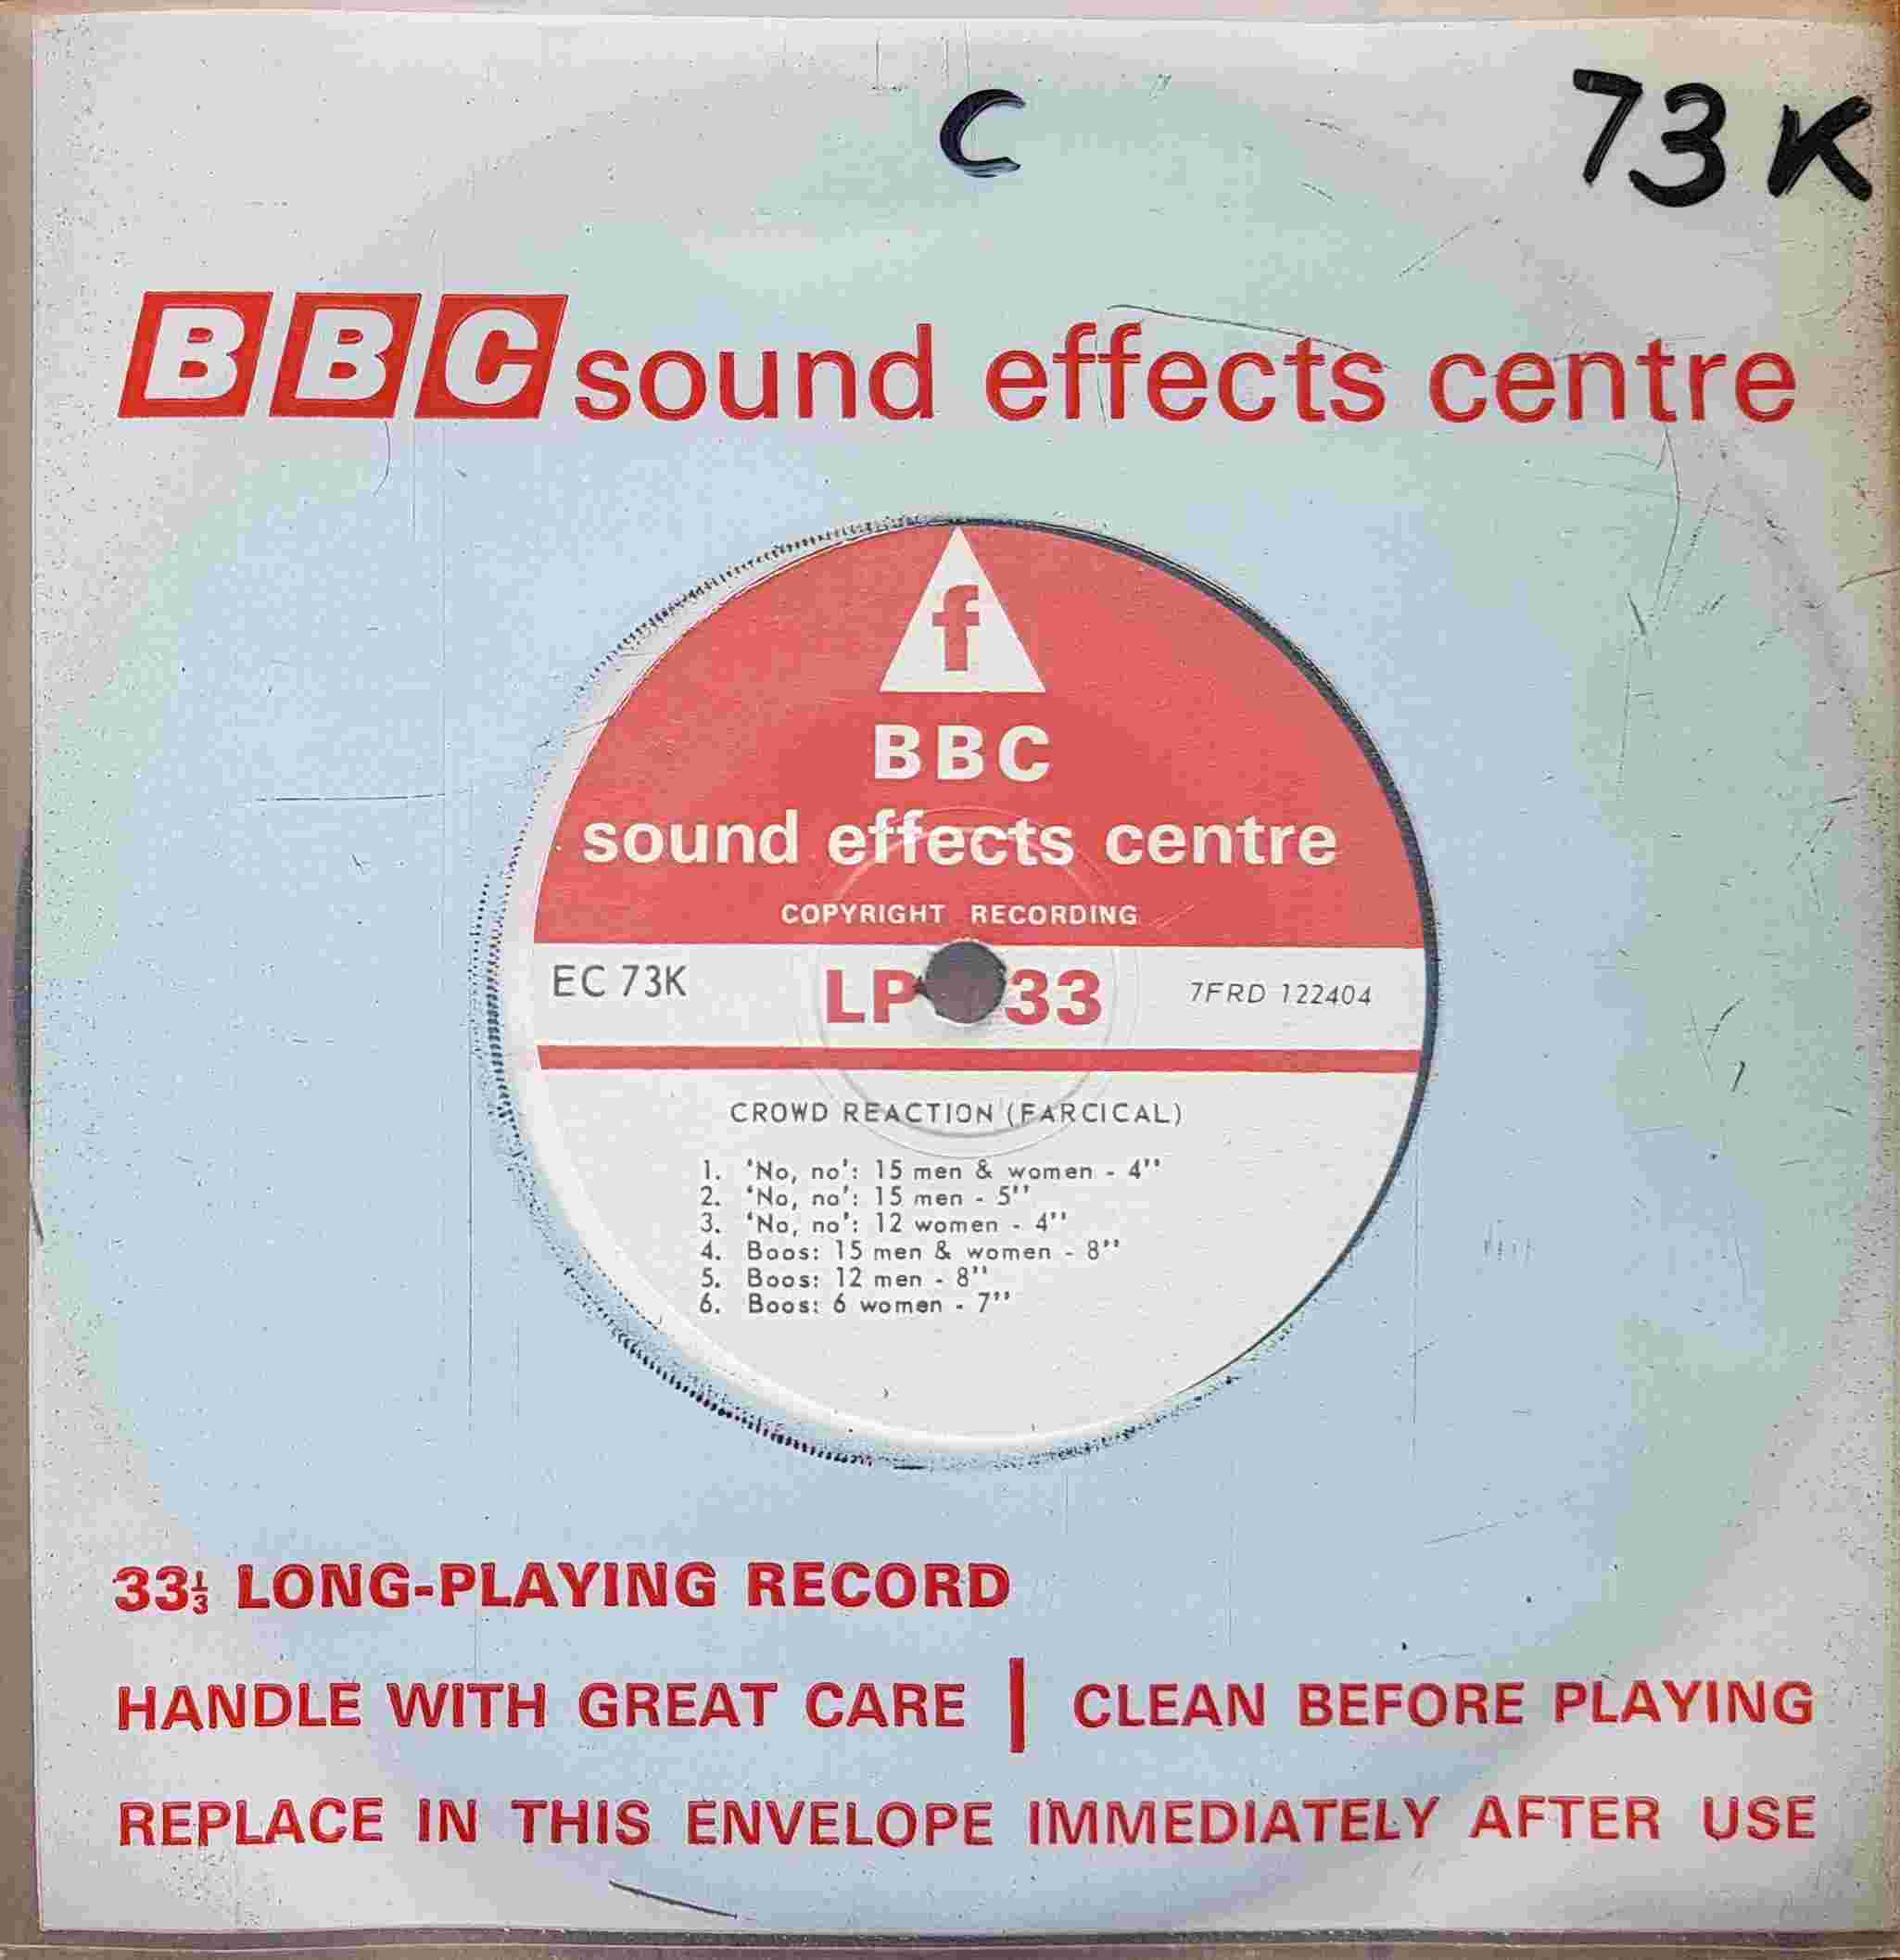 Picture of EC 73K Crowd reaction / Chatter (Farcical) by artist Not registered from the BBC records and Tapes library